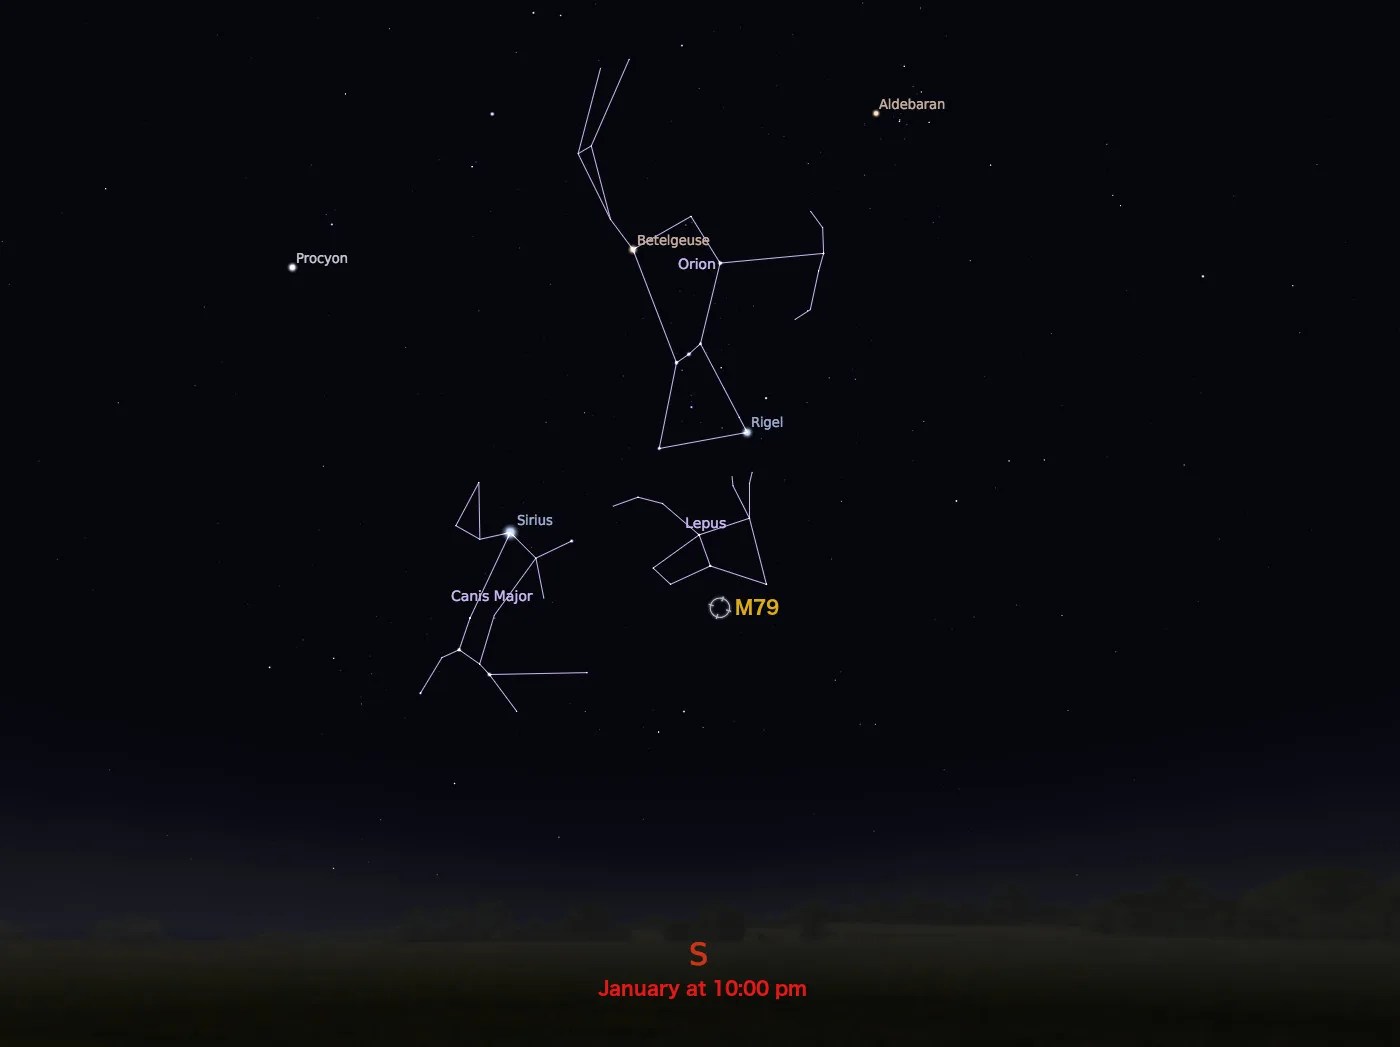 star chart showing location in night sky of M79